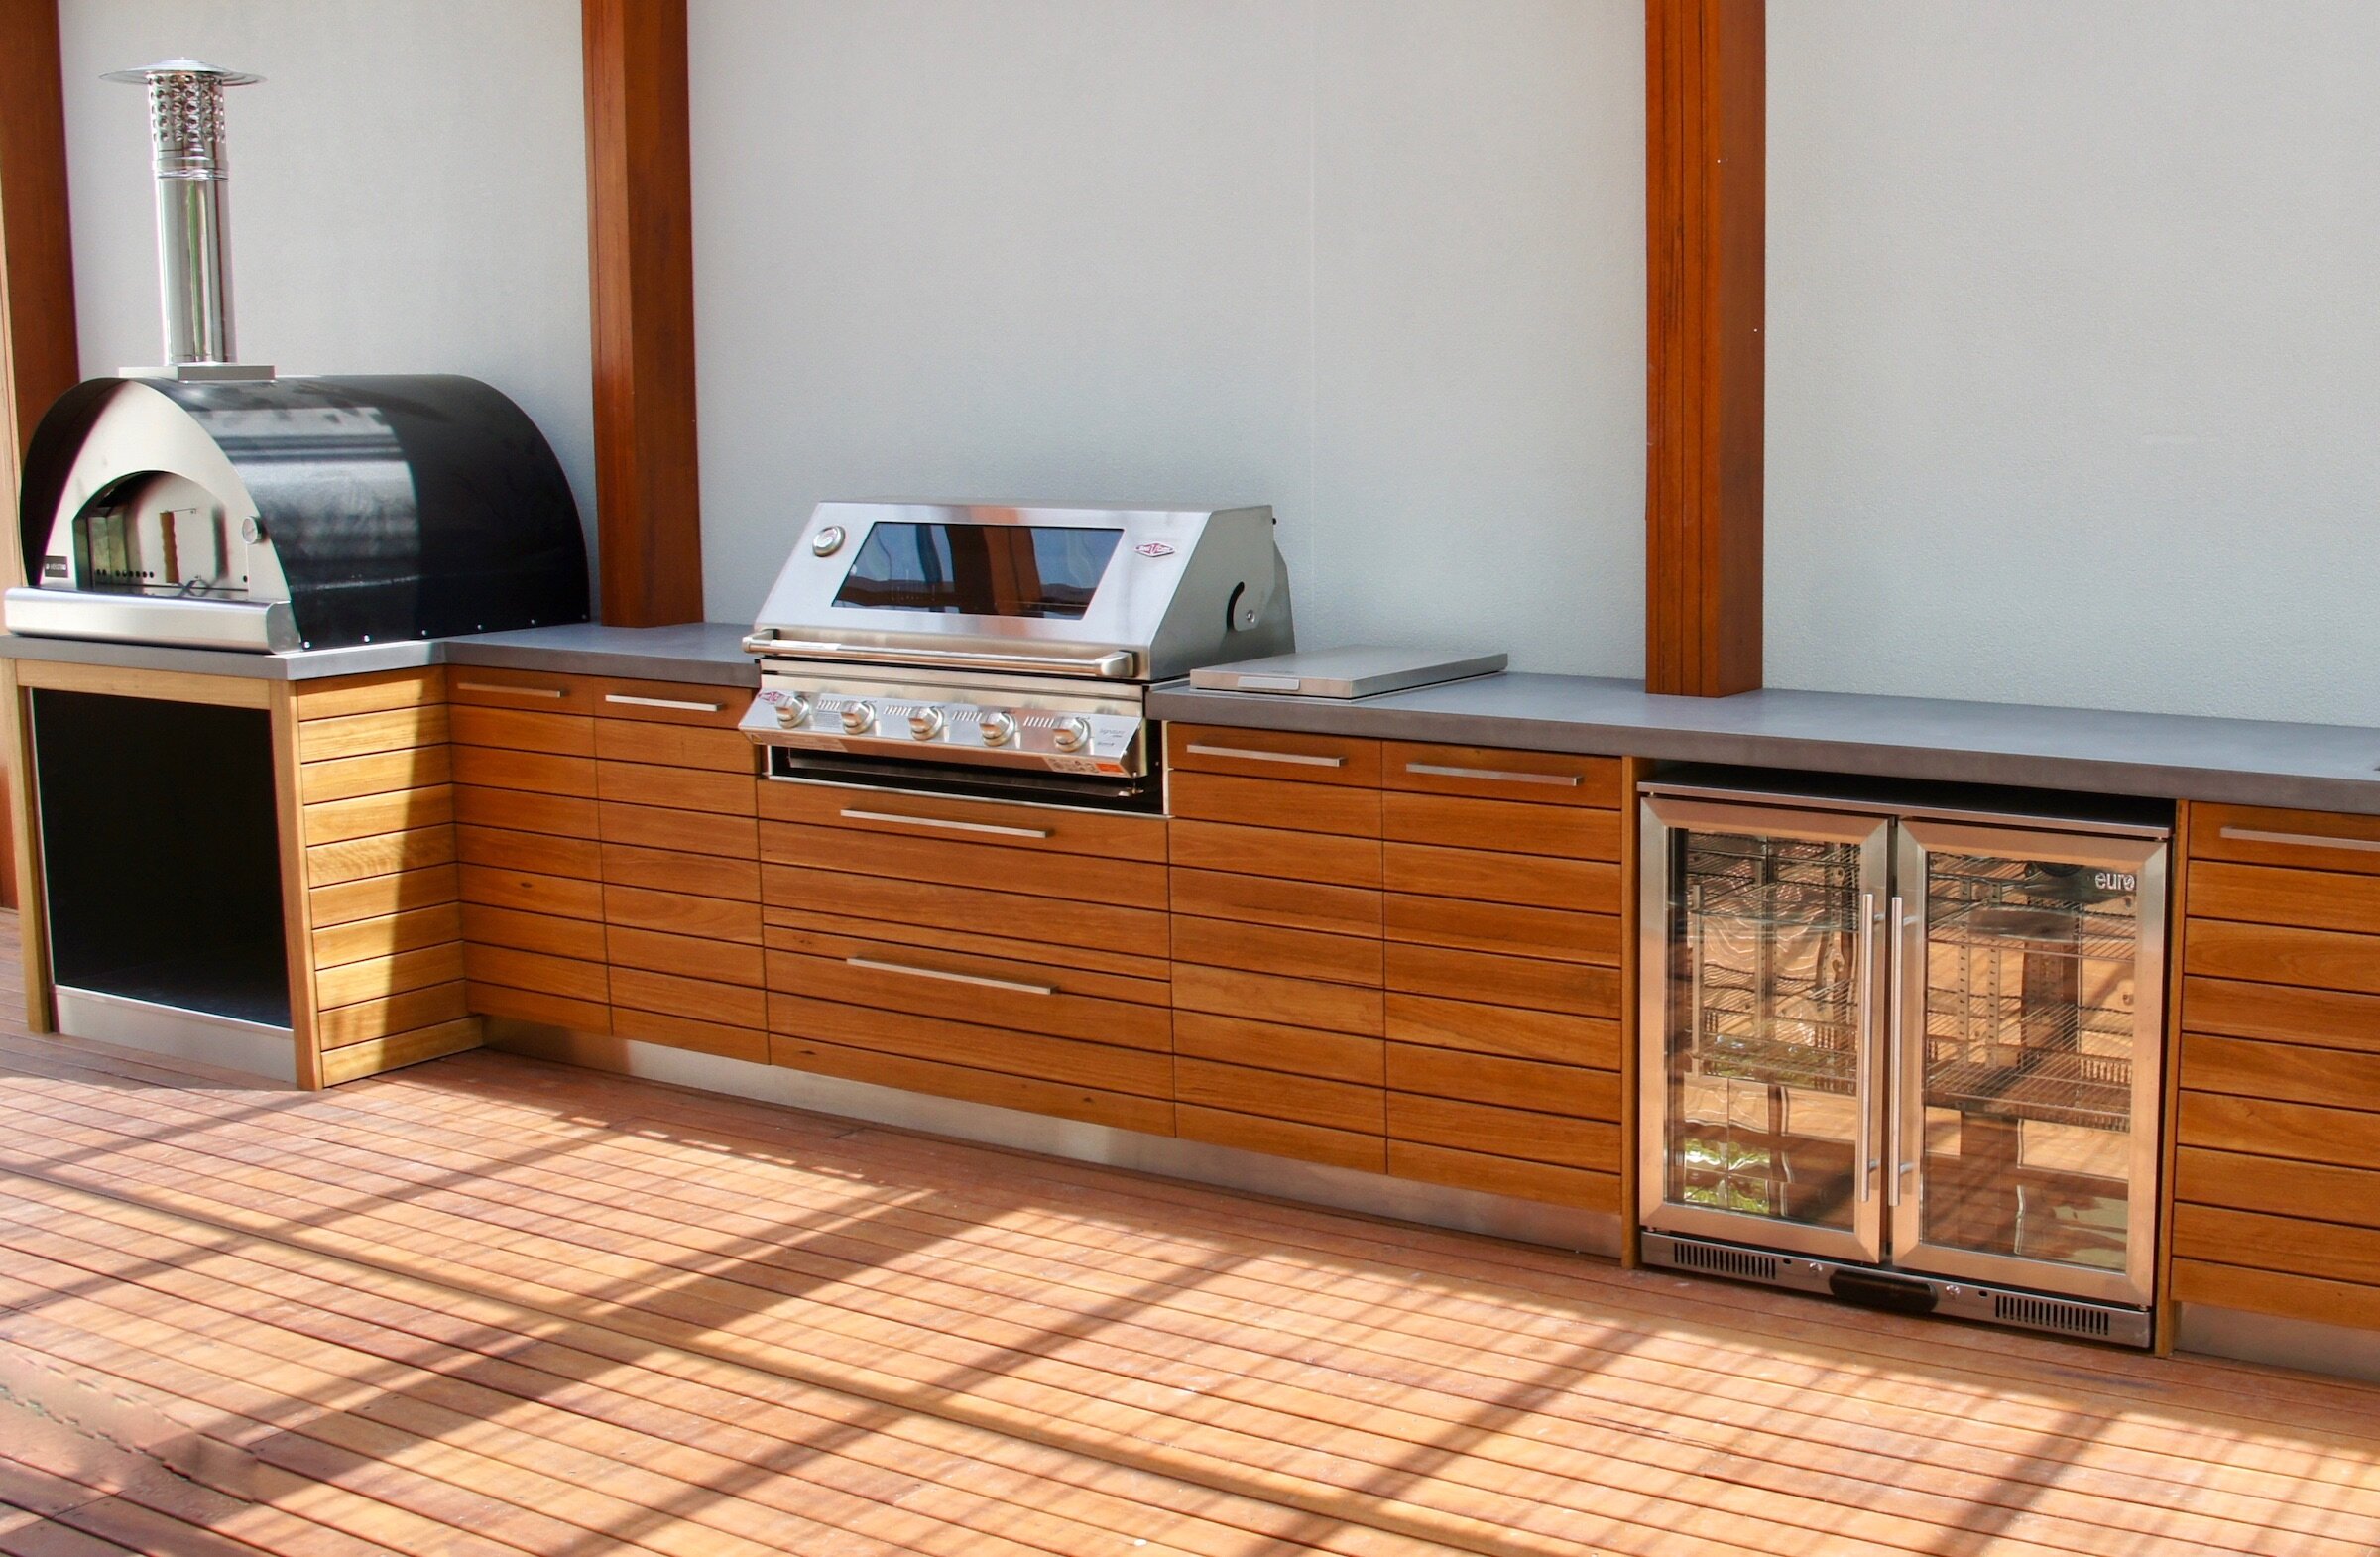 Adelaide Outdoor Kitchens - Tranmere 03.jpg